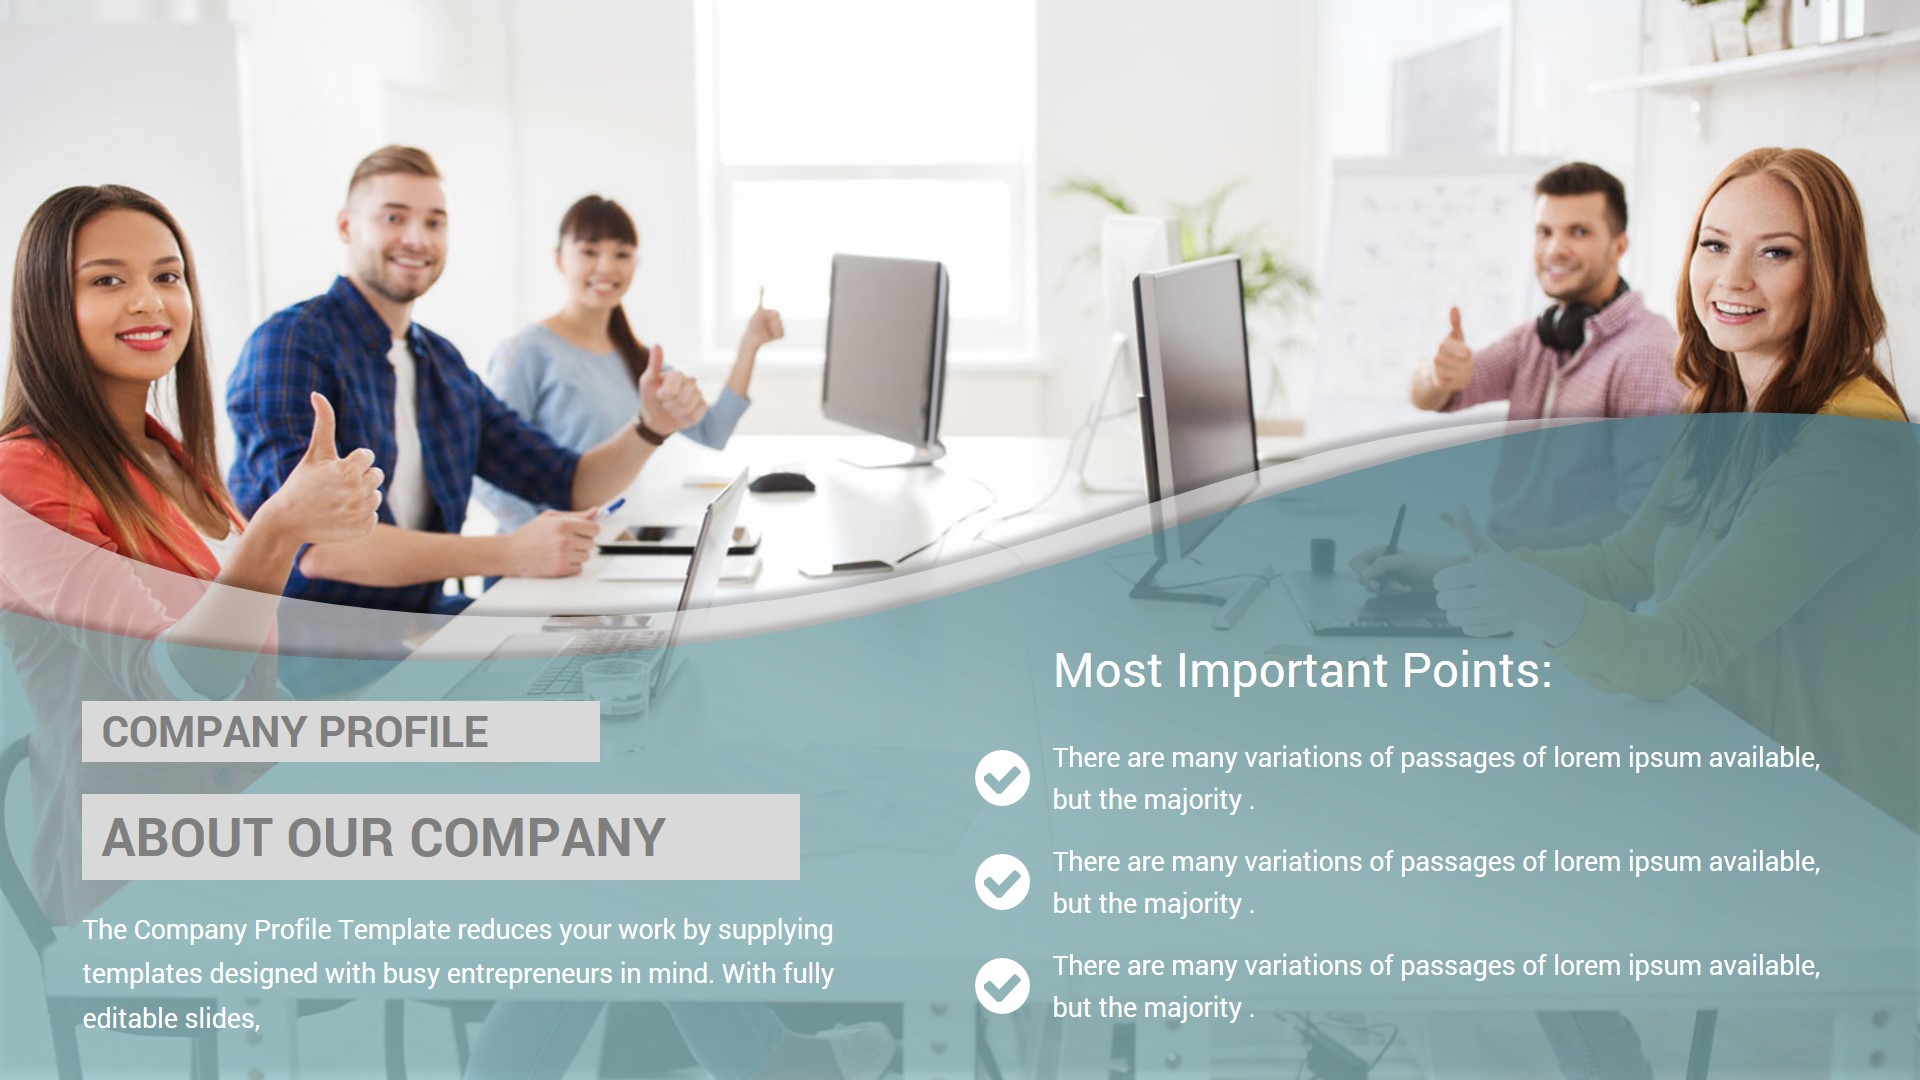 Stunning Company Profile Powerpoint Presentation Template By Ciloart My Xxx Hot Girl